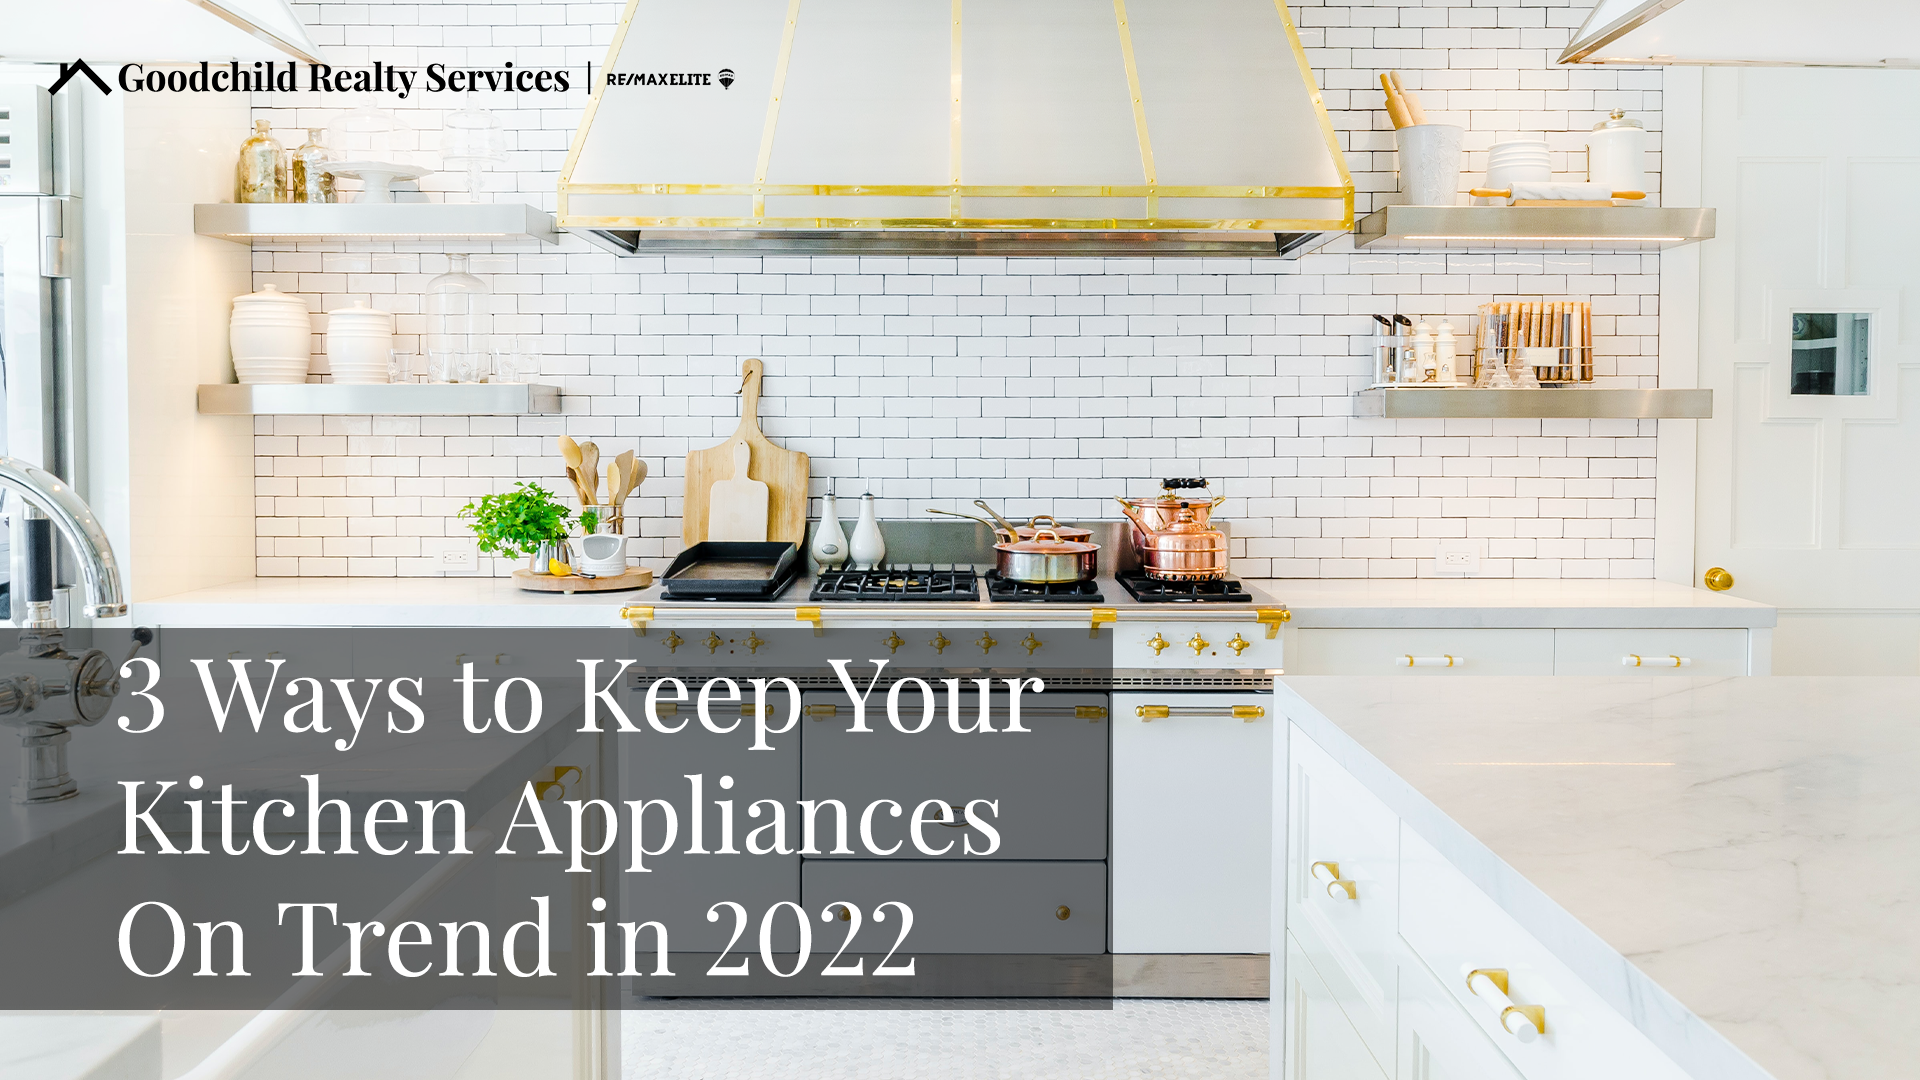 3 Ways to Keep Your Kitchen Appliances On Trend in 2022